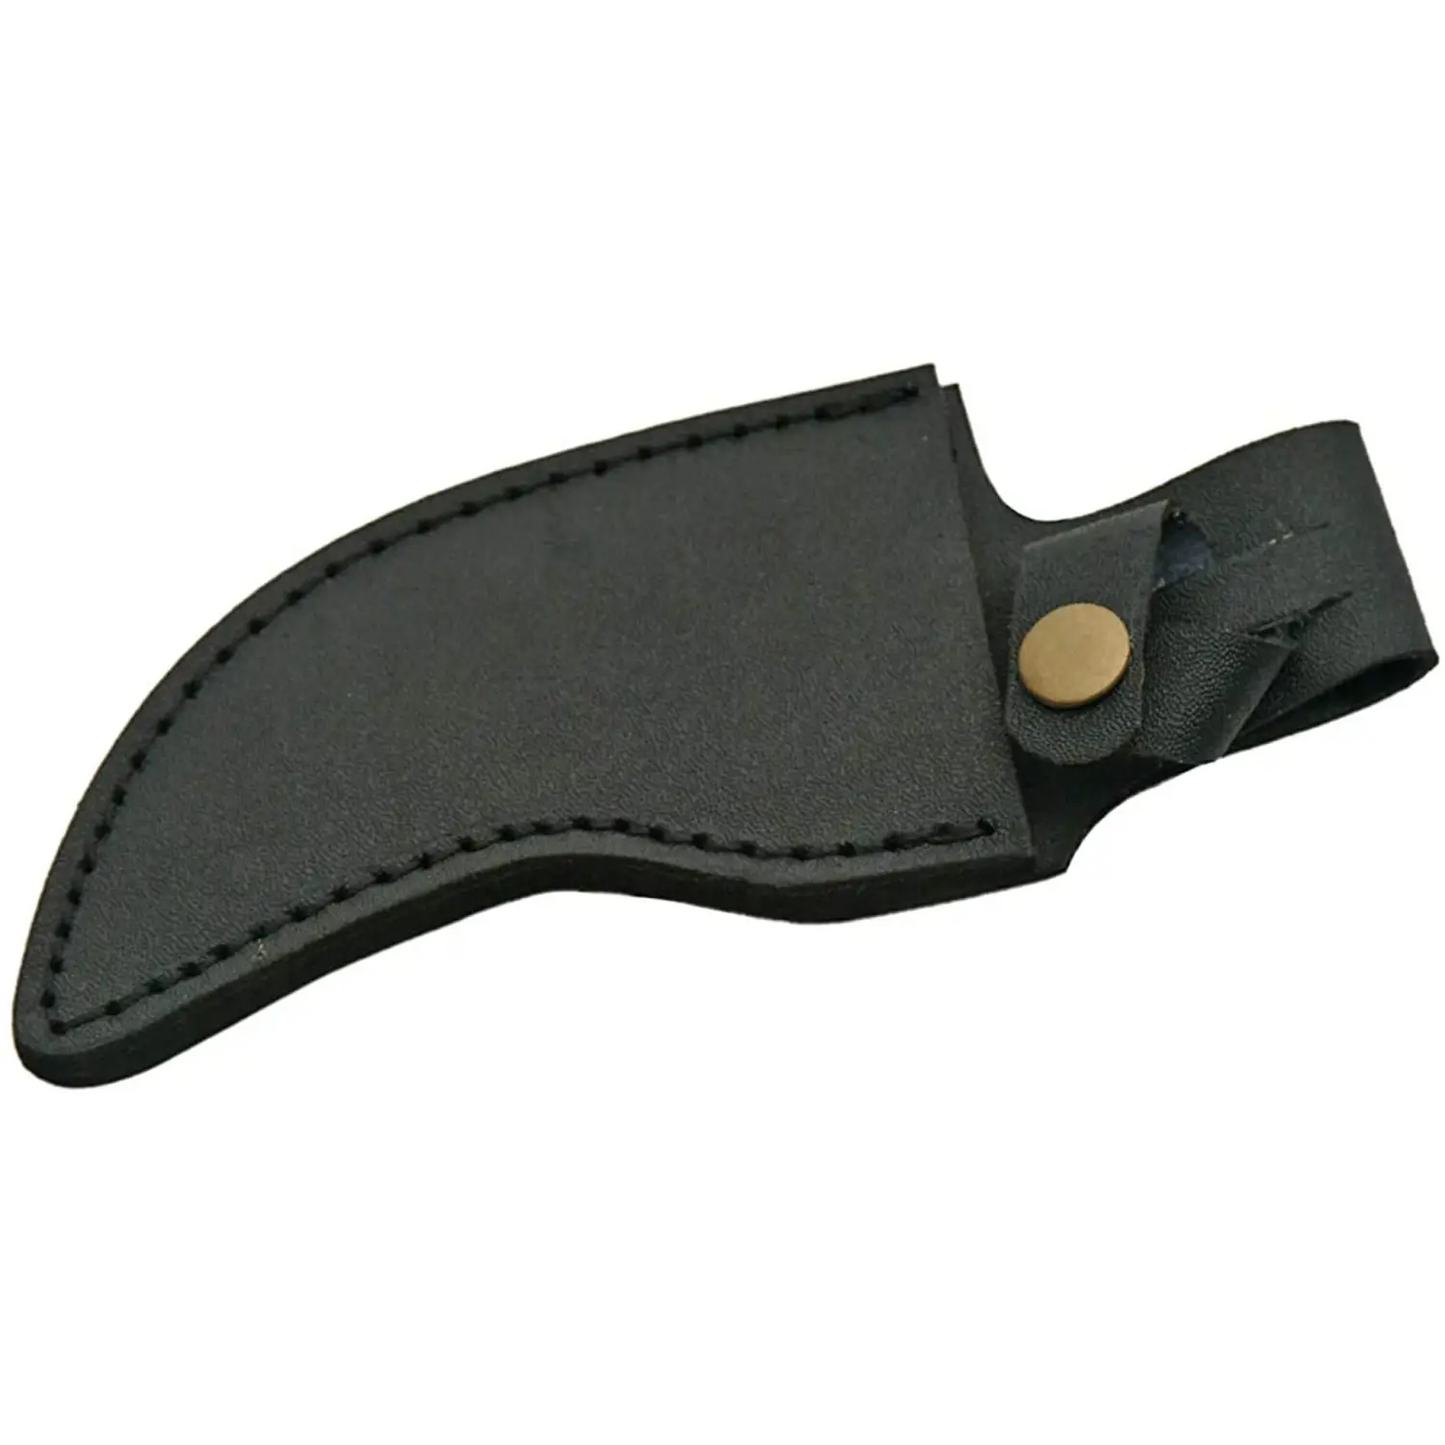 Exclusive 6 Multi Color Short Skinner with Sheath 202989-MC